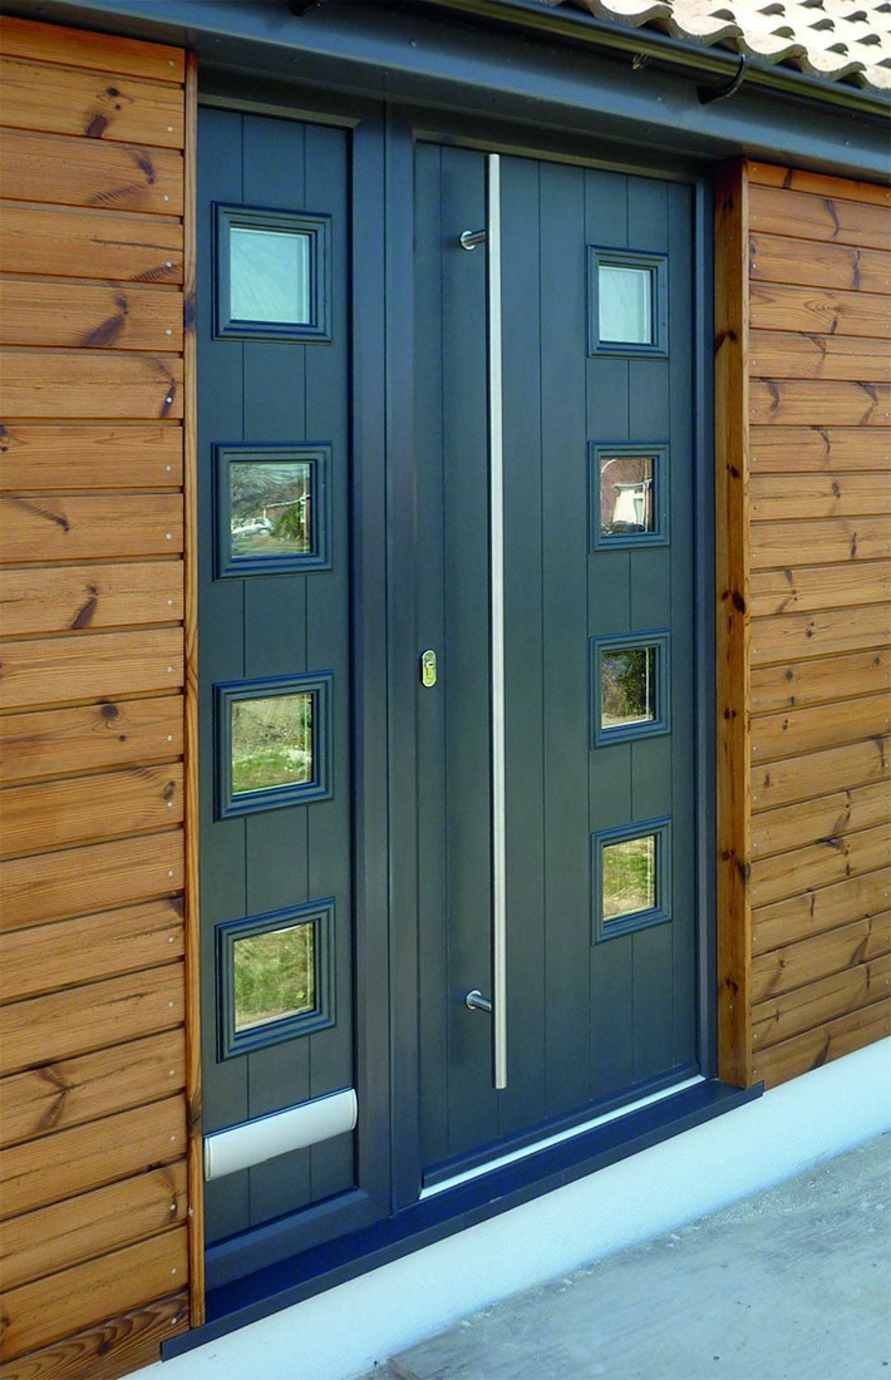 Period and Contemporary Doors